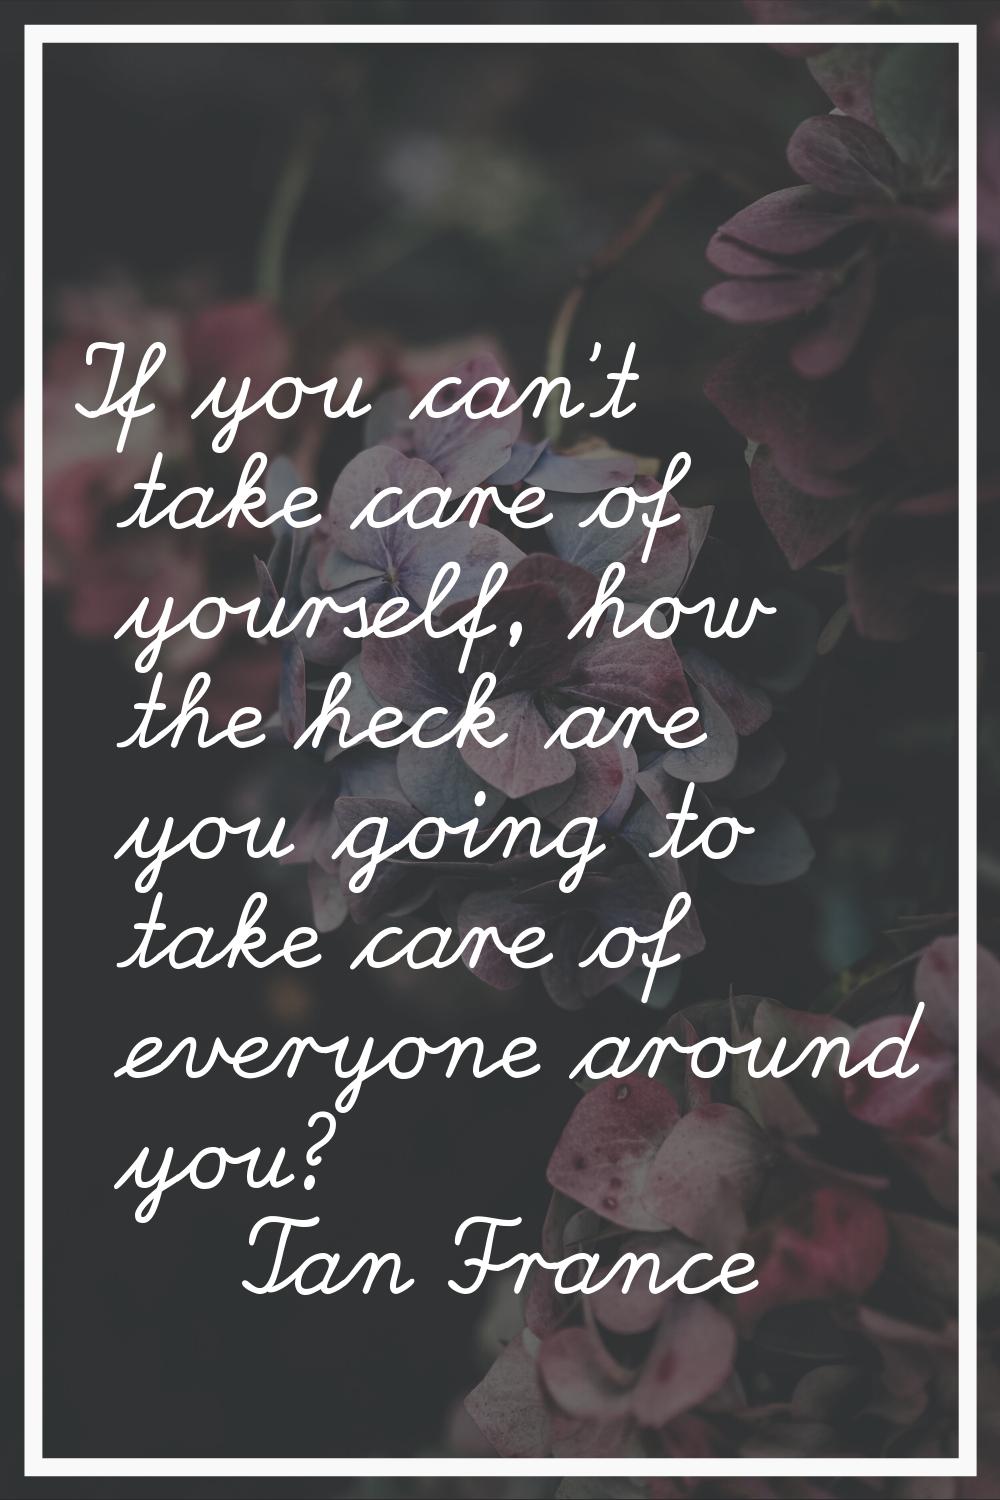 If you can't take care of yourself, how the heck are you going to take care of everyone around you?